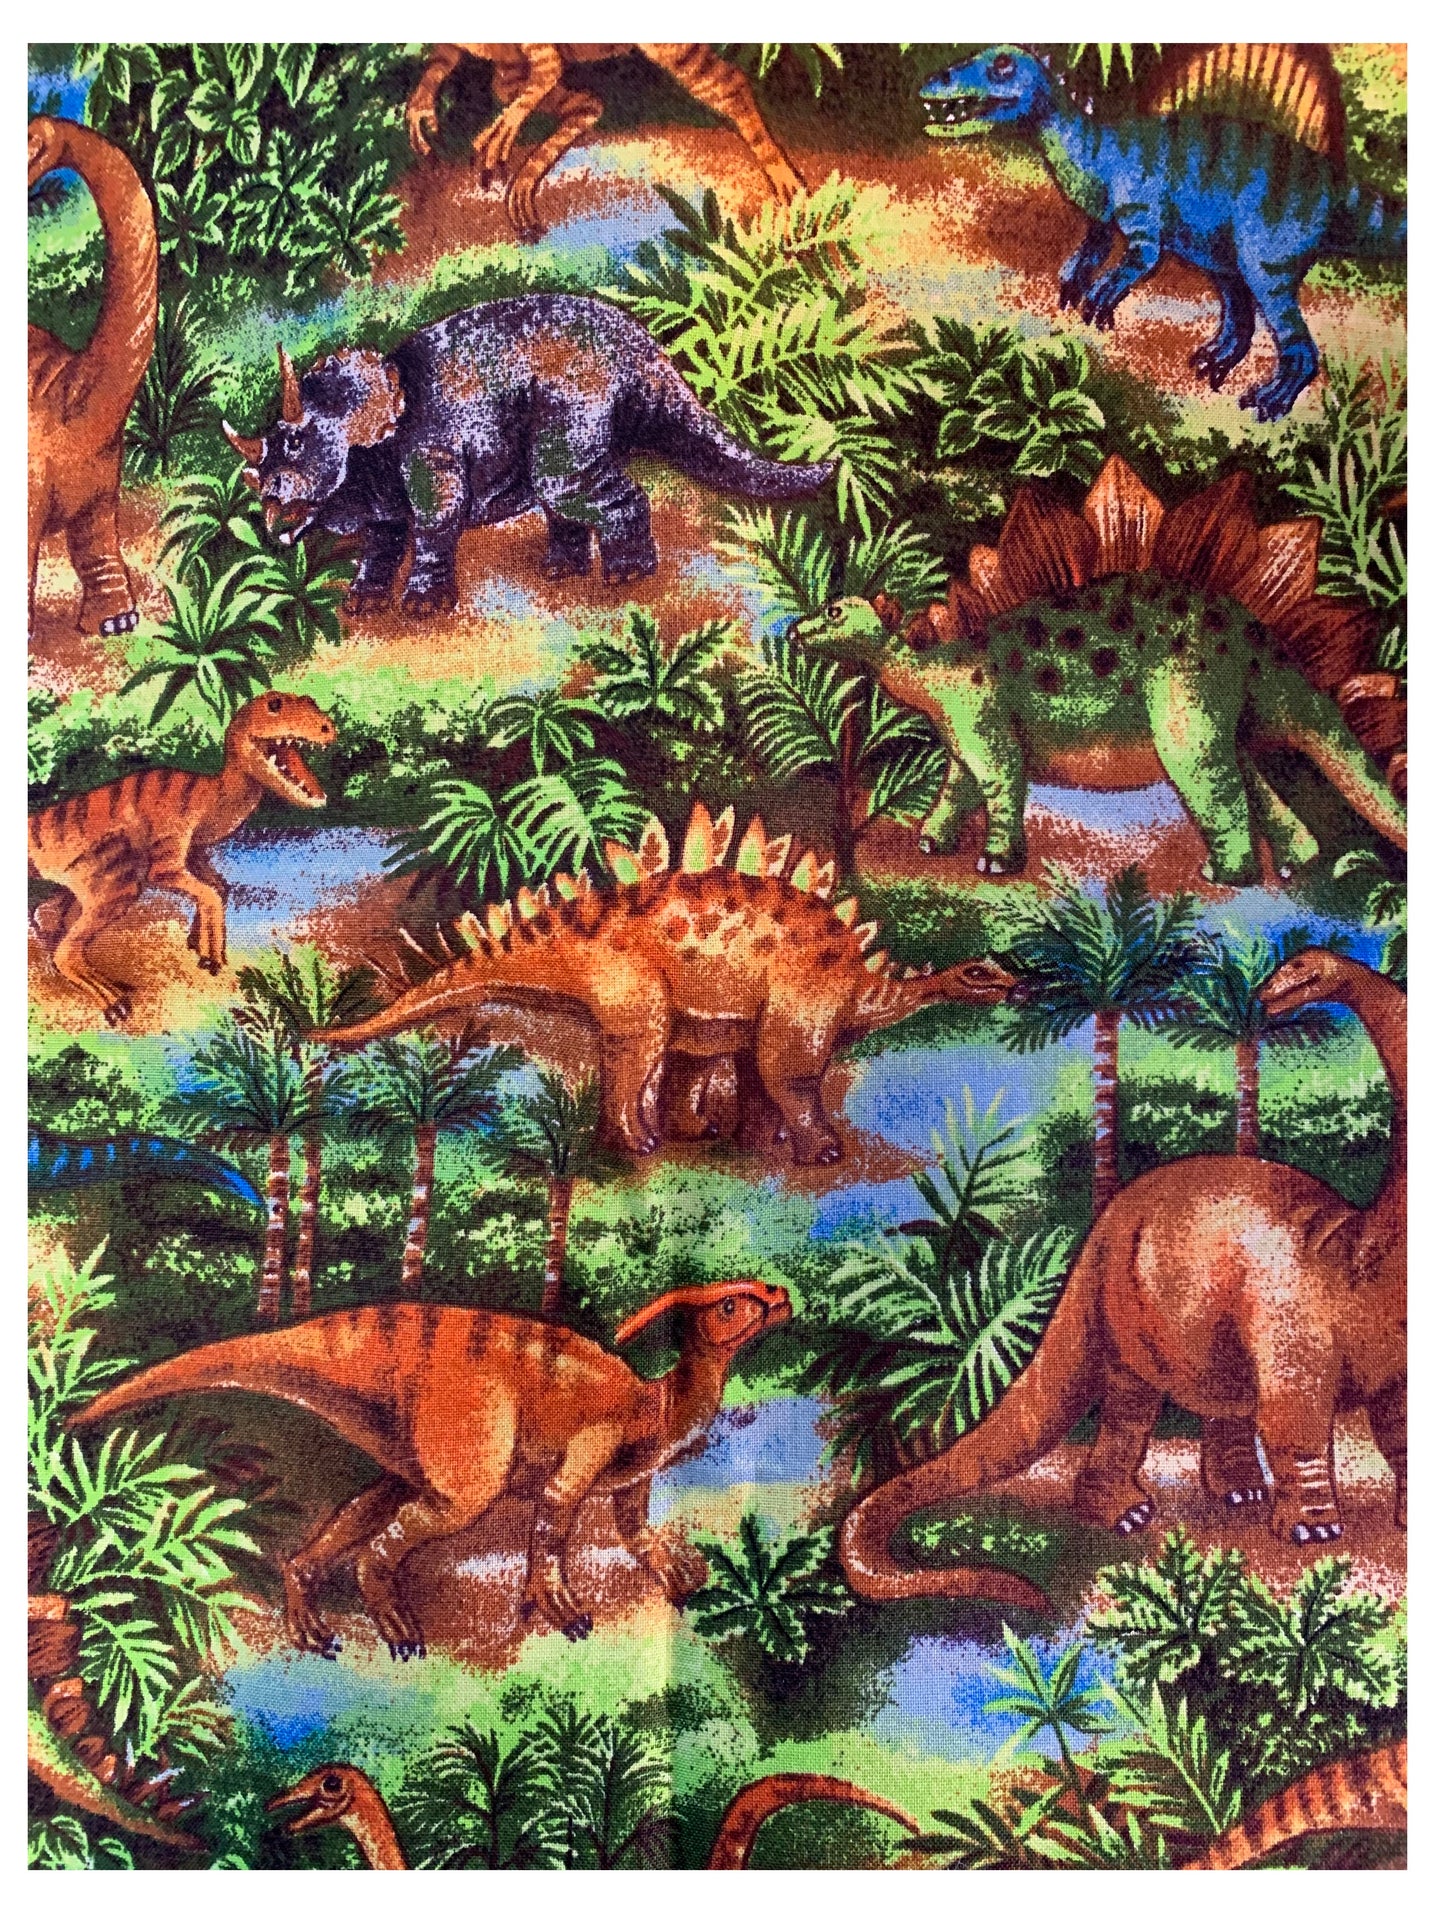 Child Weighted blanket, toddler bed or lap with 5 lbs, dinosaurs or planets, washable